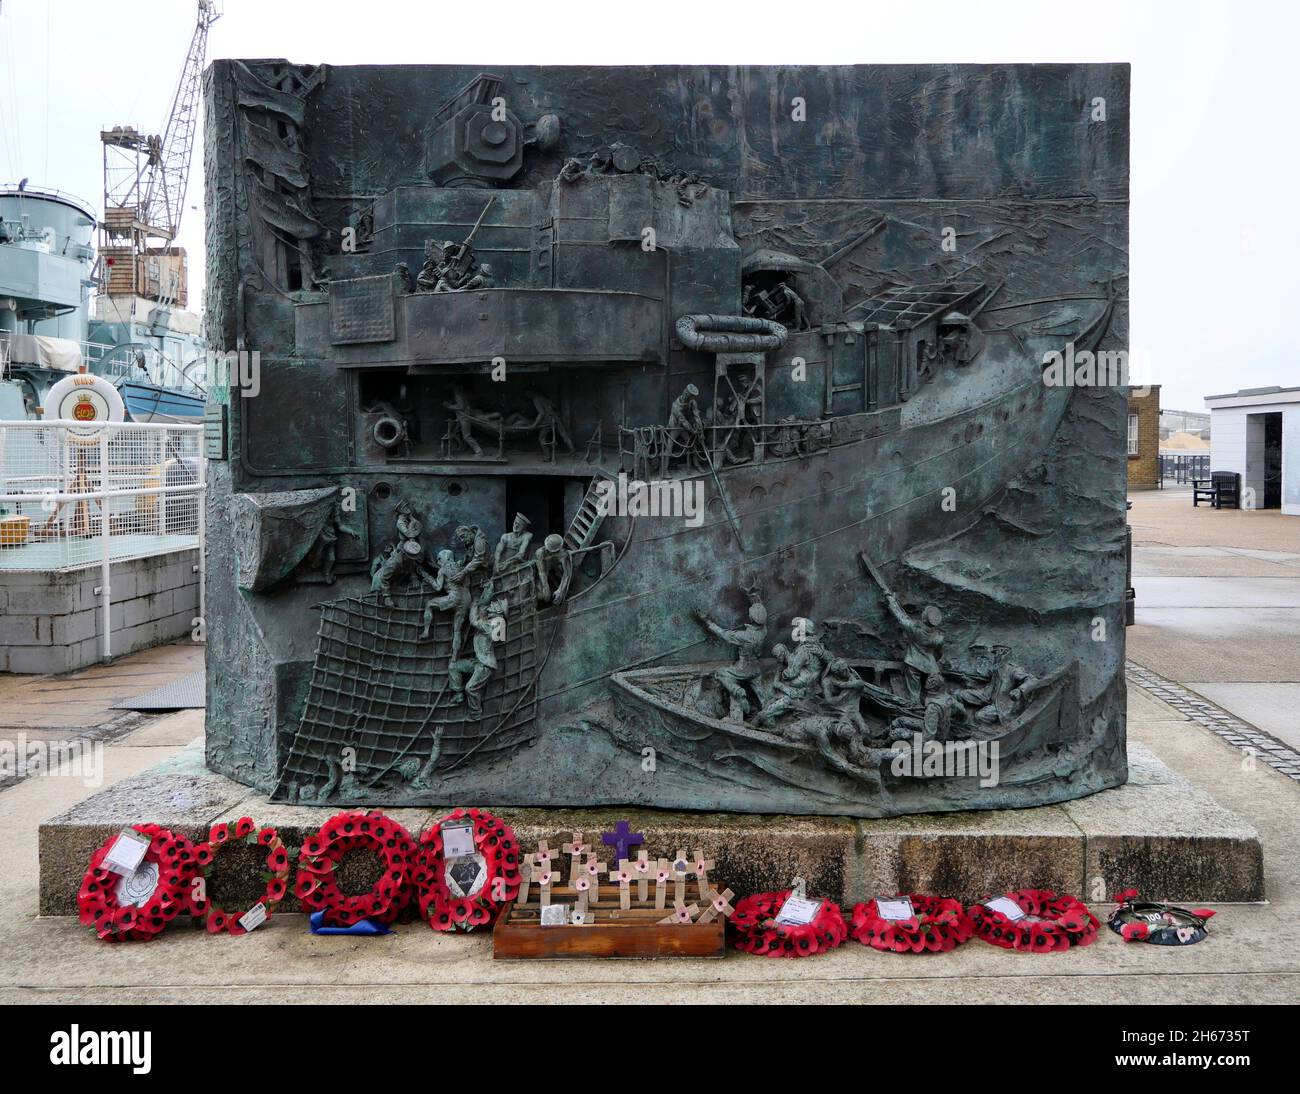 AJAXNETPHOTO. 3RD APRIL, 2019. CHATHAM, ENGLAND. - CHATHAM HISTORIC DOCKYARD - THE NATIONAL DESTROYER MEMORIAL, A BRONZE SCULPTURE SITED ALONGSIDE PRESERVED WW II C CLASS DESTROYER HMS CAVALIER TO THE 11,000 MEN AND 142 ROYAL NAVAL AND ALLIED DESTROYERS LOST DURING BETWEEN 1939-45. VERSO OF THE PLAQUE LISTS NAMES OF THE SHIPS LOST; SIDE FACING CAMERA DEPICTS SAILORS BEING PLUCKED FROM THE SEA BY A DESTROYER.PHOTO:JONATHAN EASTLAND/AJAX REF:GX8_190304_158 Stock Photo